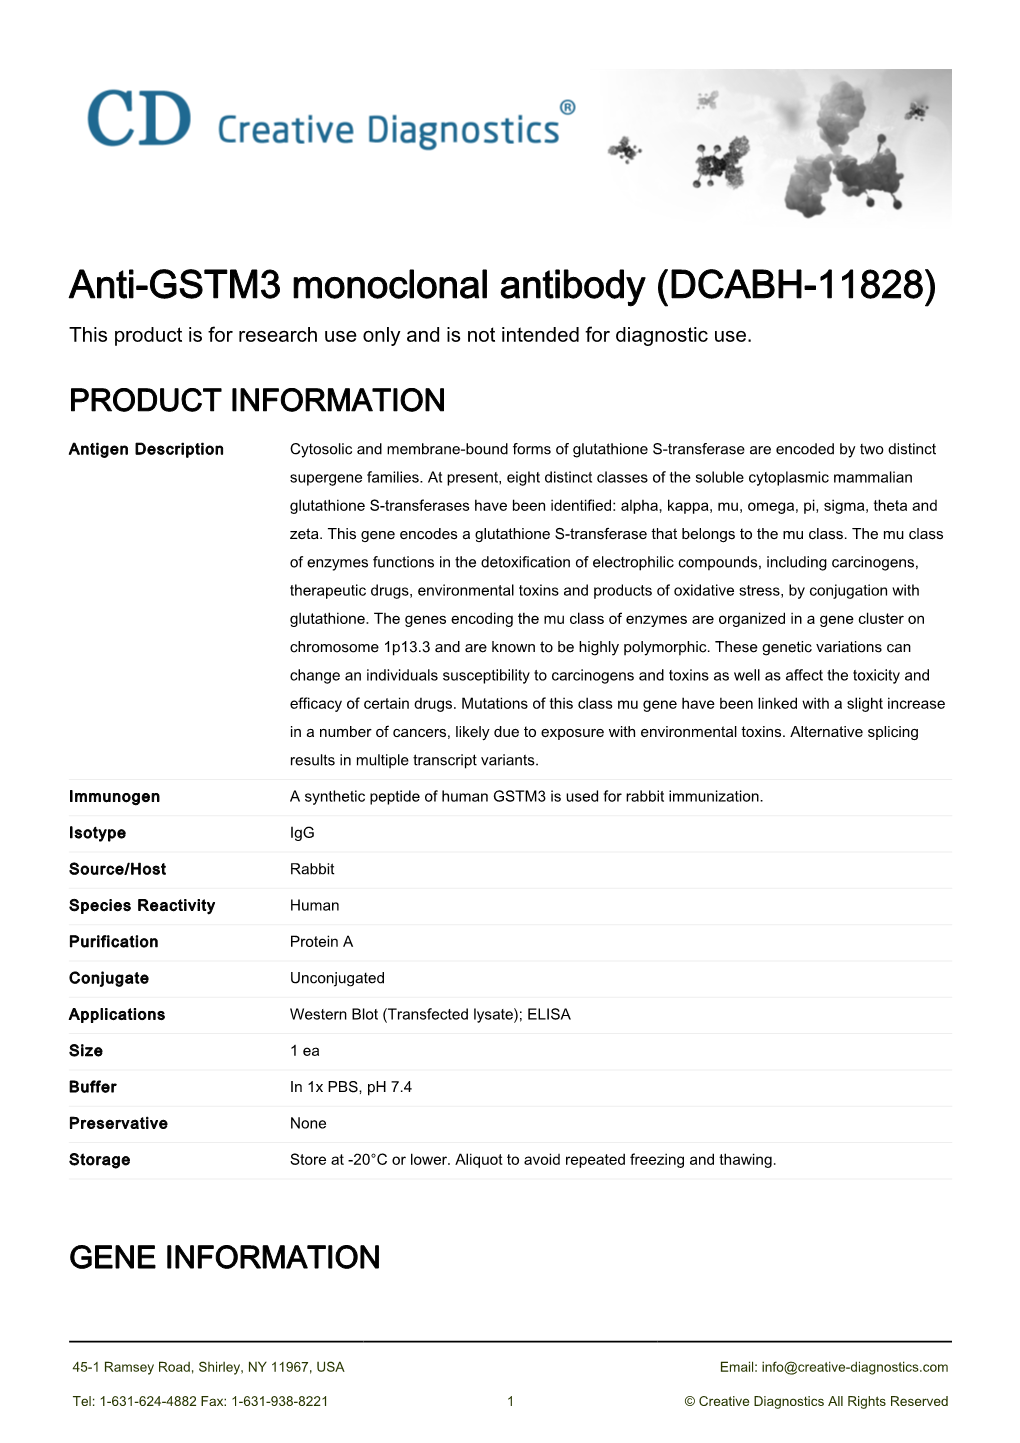 Anti-GSTM3 Monoclonal Antibody (DCABH-11828) This Product Is for Research Use Only and Is Not Intended for Diagnostic Use